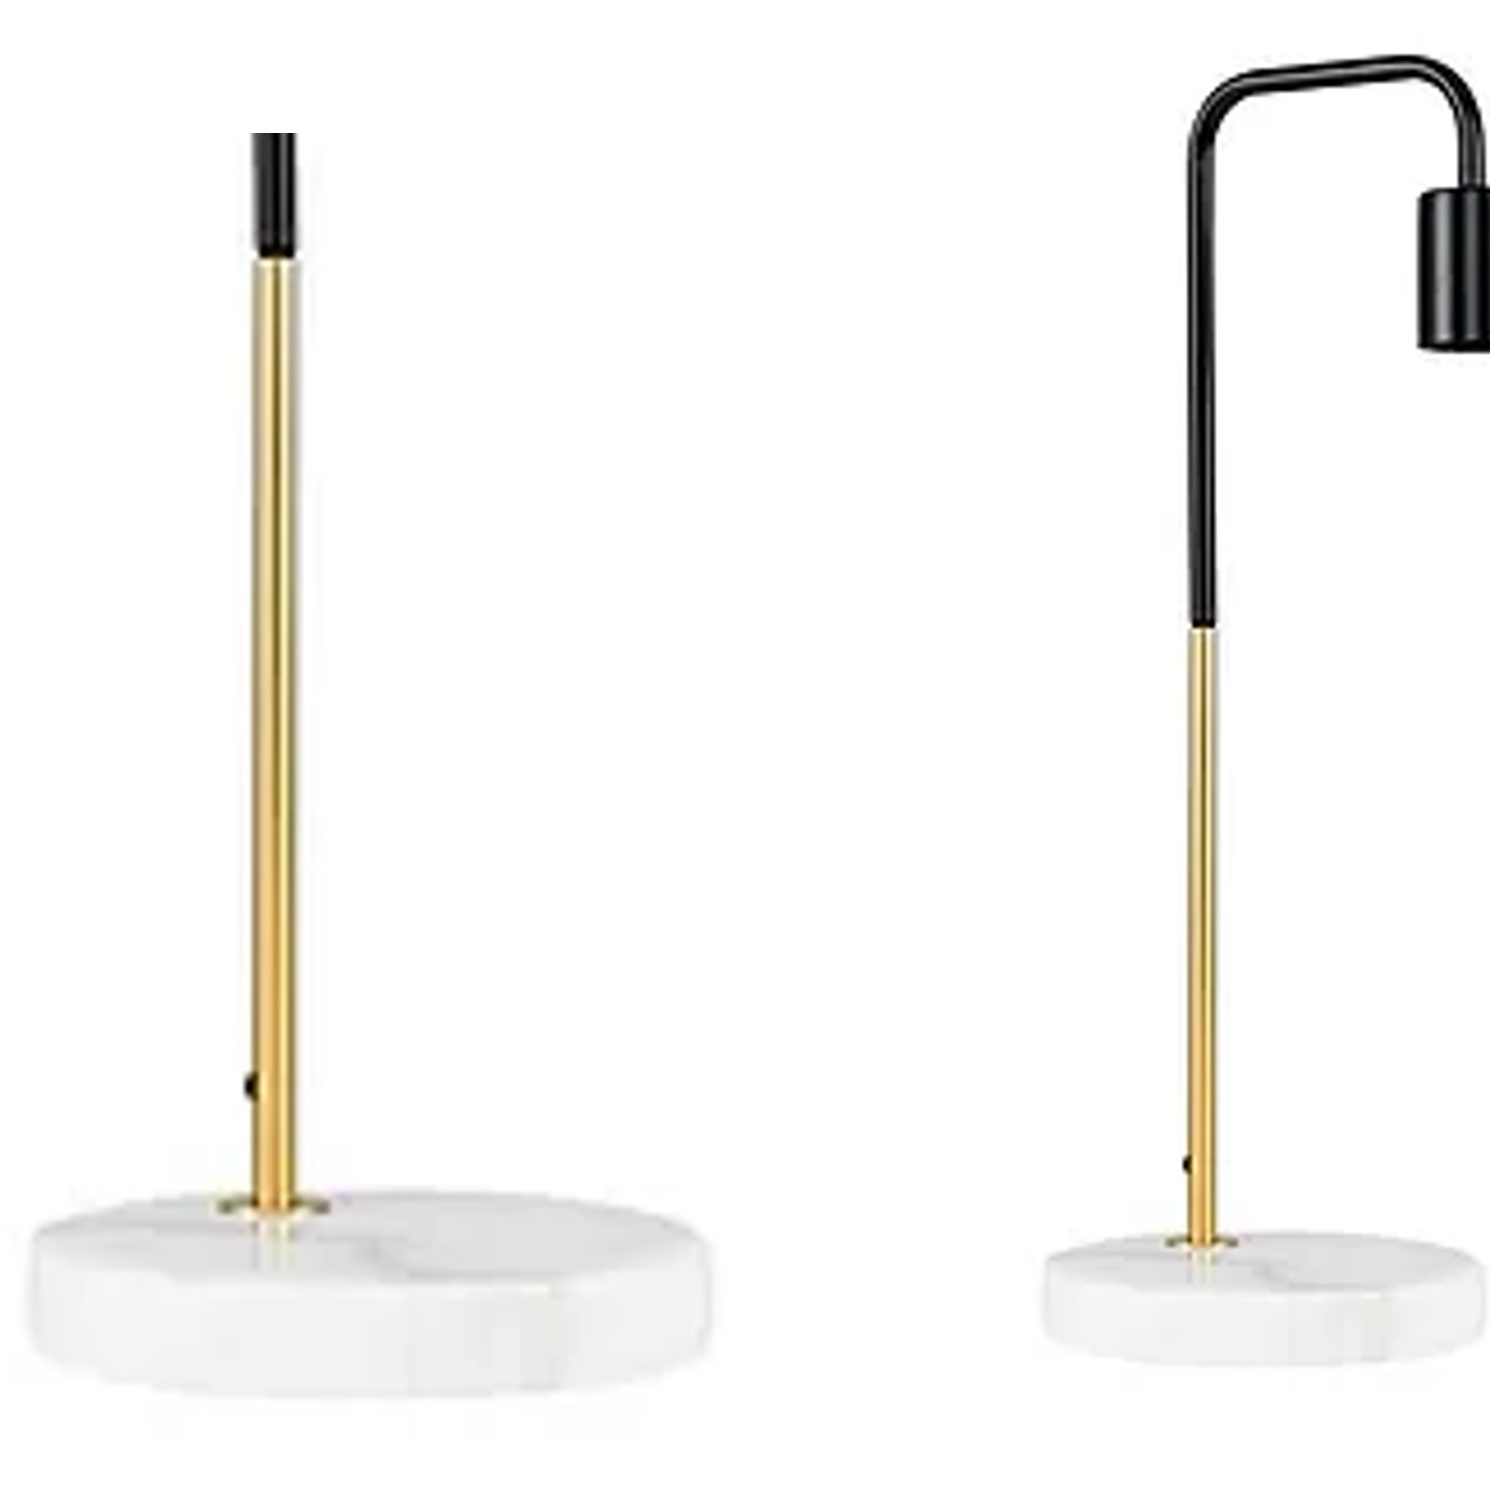 Table Lamp with Marble Base - Gold Stem - Compatible with E27 Edison Screw Fitting Bulb